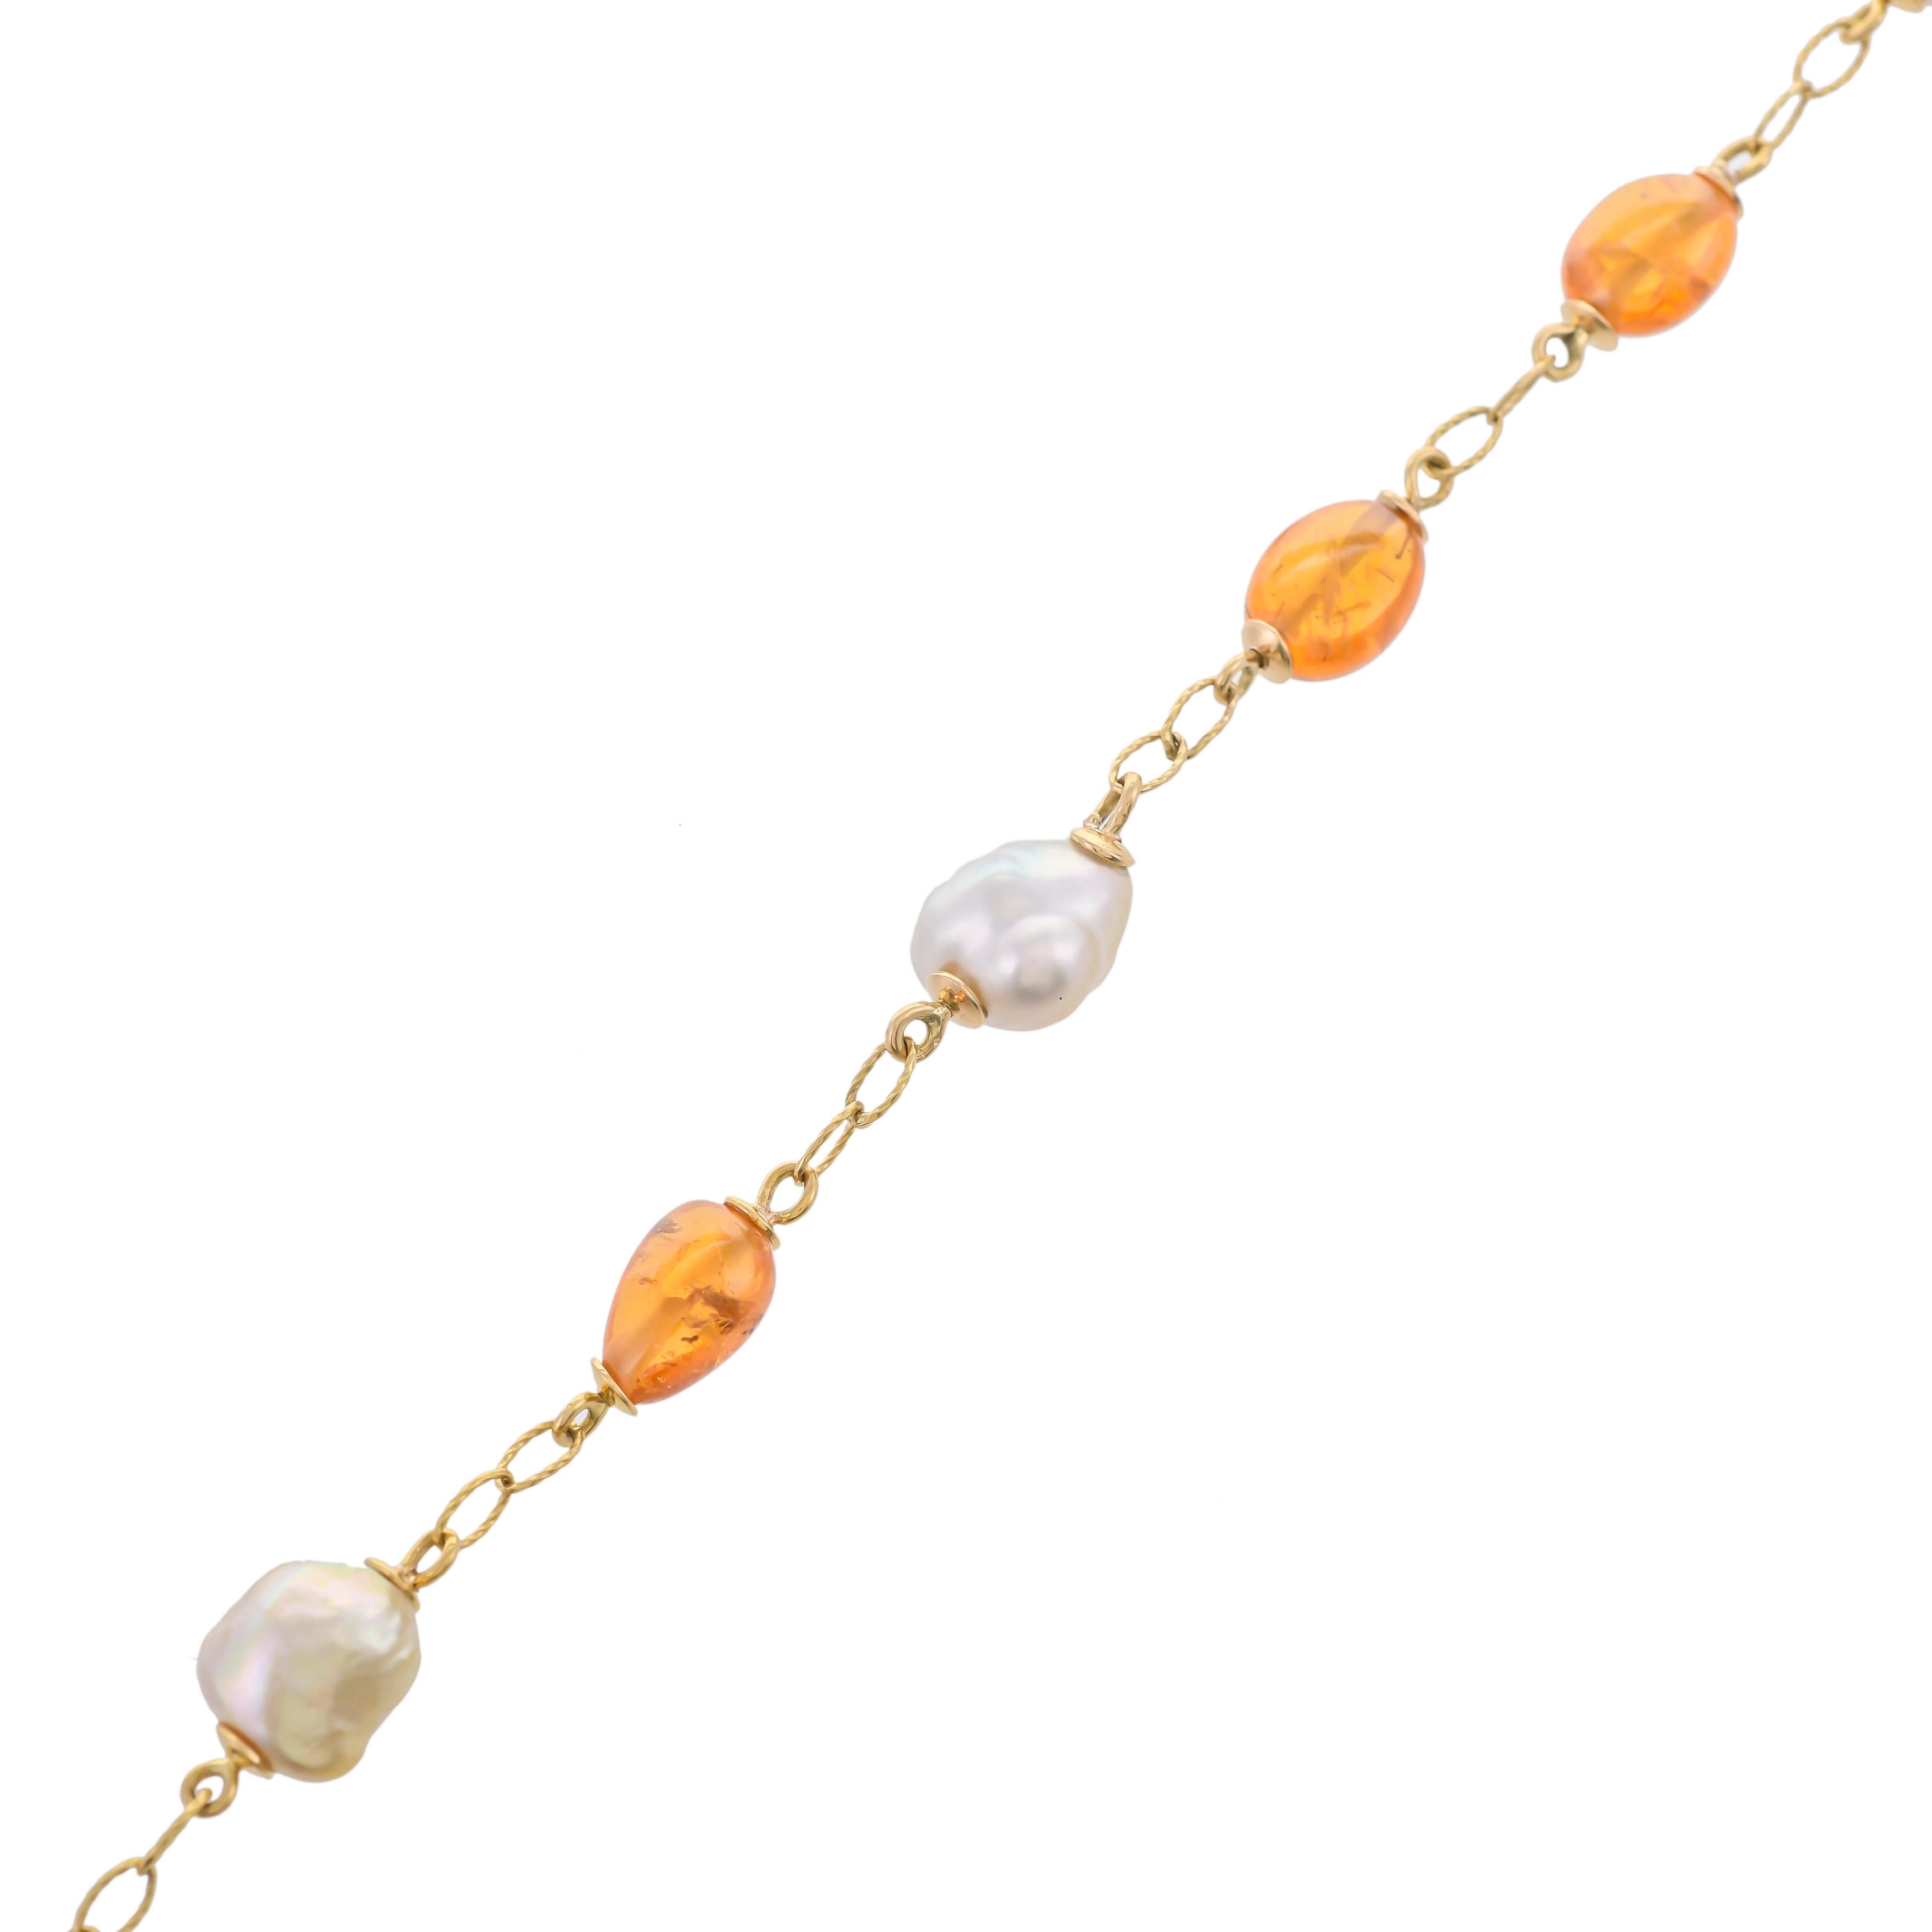 A stunning combination of 10.99 carats south sea pearls and 14.50 carats mandarin garnet. Further decorated with gold links adds gorgeousness to this 18 karats yellow gold bracelet.
Art of gifting: the Jewel is presented with 'Exquisite Fine